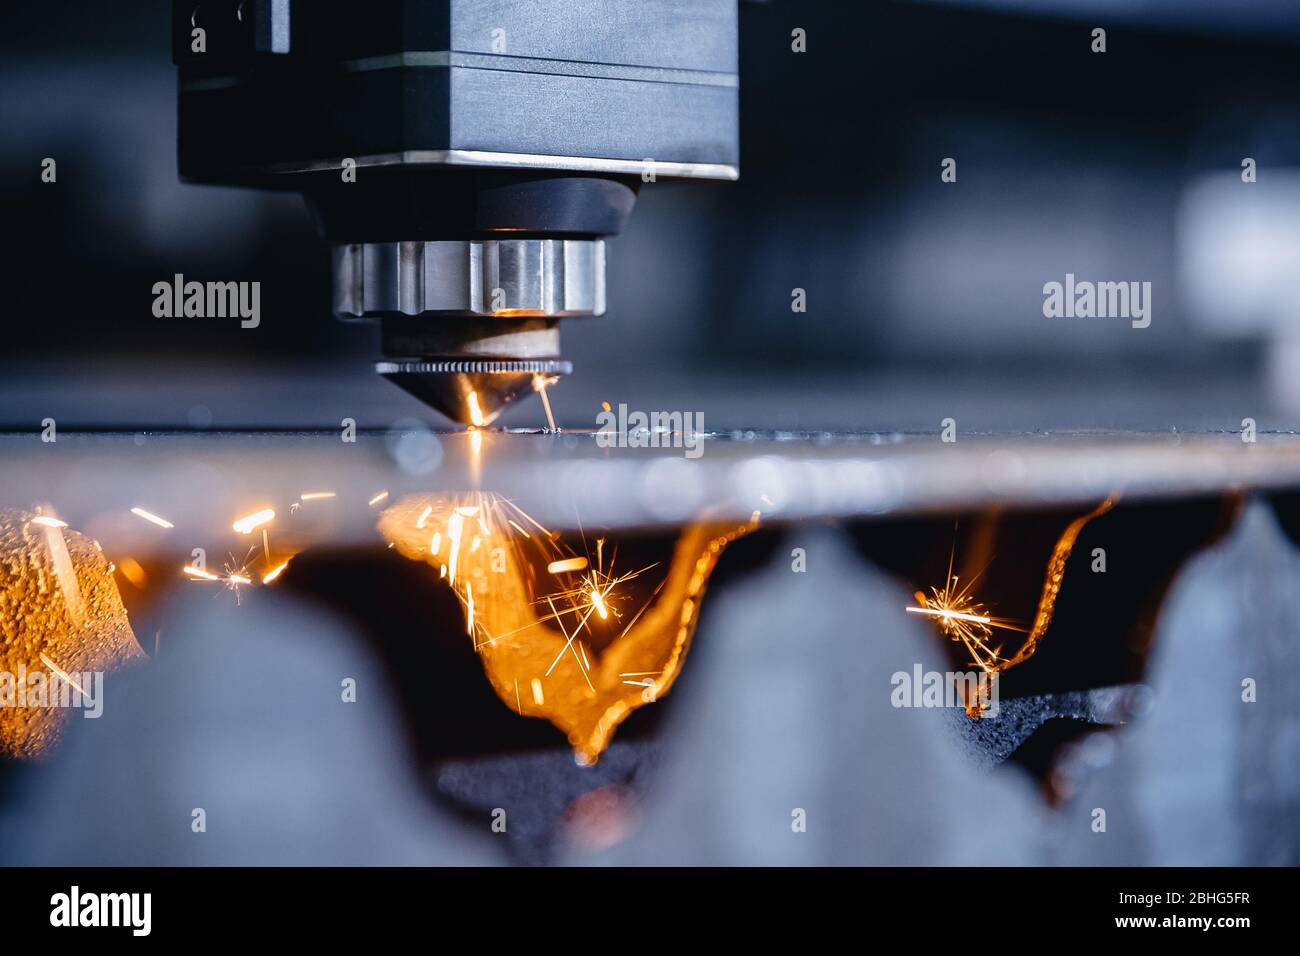 Cnc Gas Cutting Metal Sheet Sparks Fly Blue Steel Color Modern Industrial Technology Stock Photo Alamy